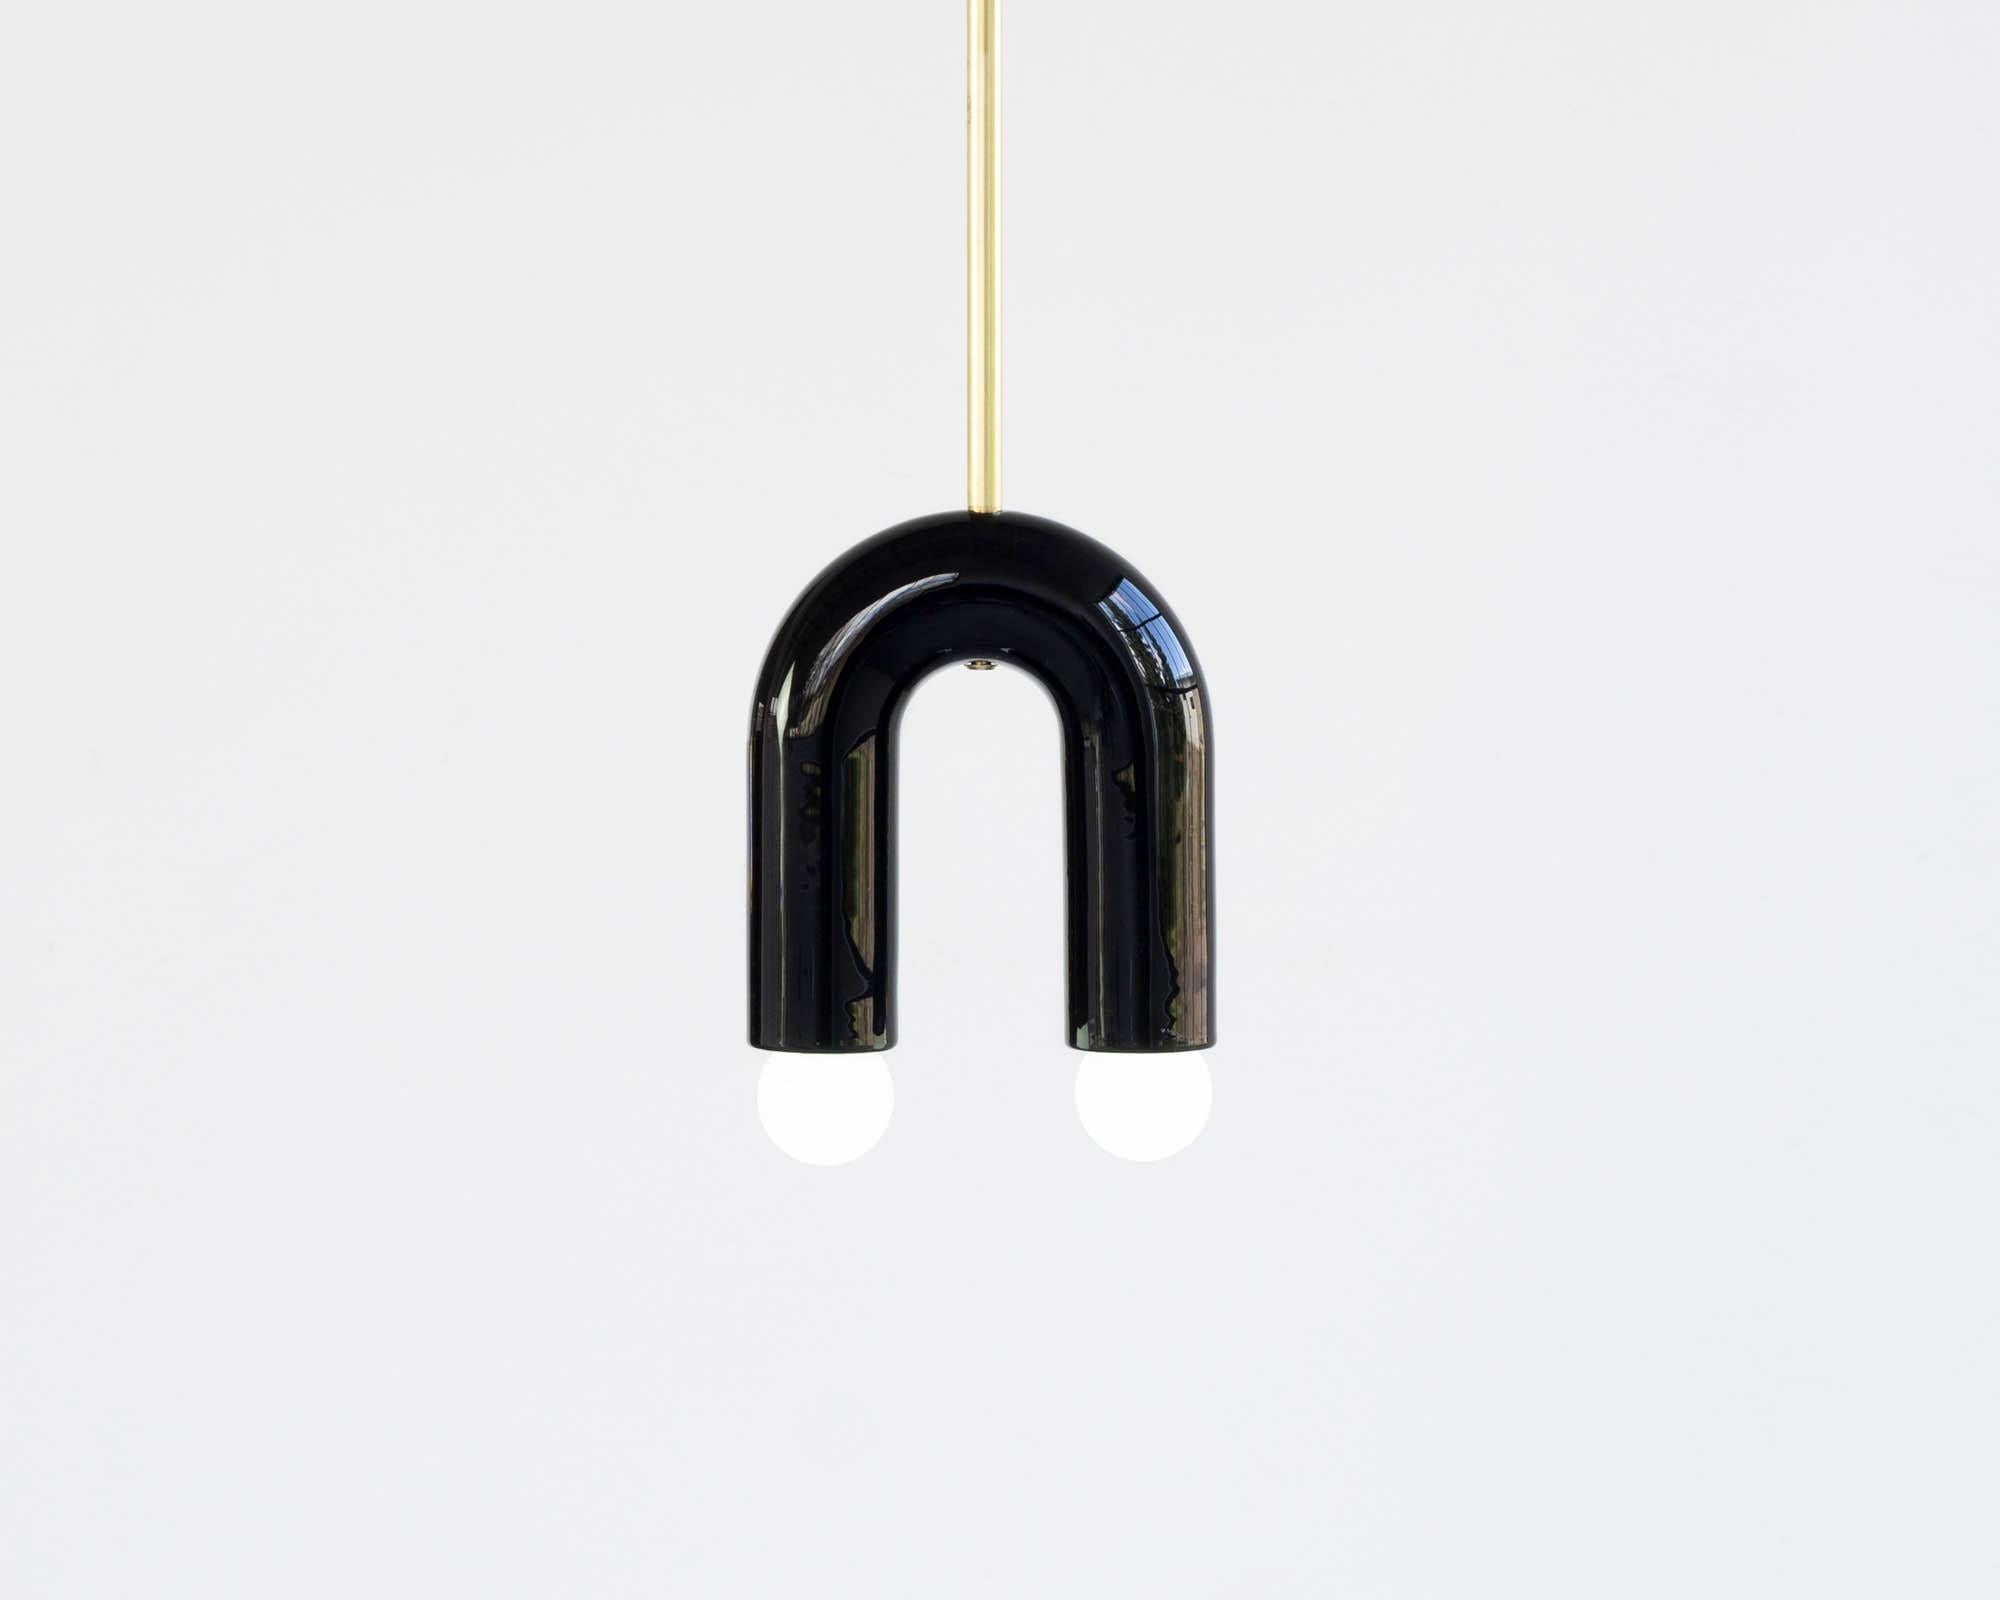 TRN A1 Pendant lamp / ceiling lamp / chandelier
Designer: Pani Jurek

Model shown: TRN A1, Navy Blue, Brass rod
Dimensions: H 17.5 x 15 x 5 cm

Bulb (not included): E27/E26, compatible with US electric system

Materials: Hand glazed ceramic and